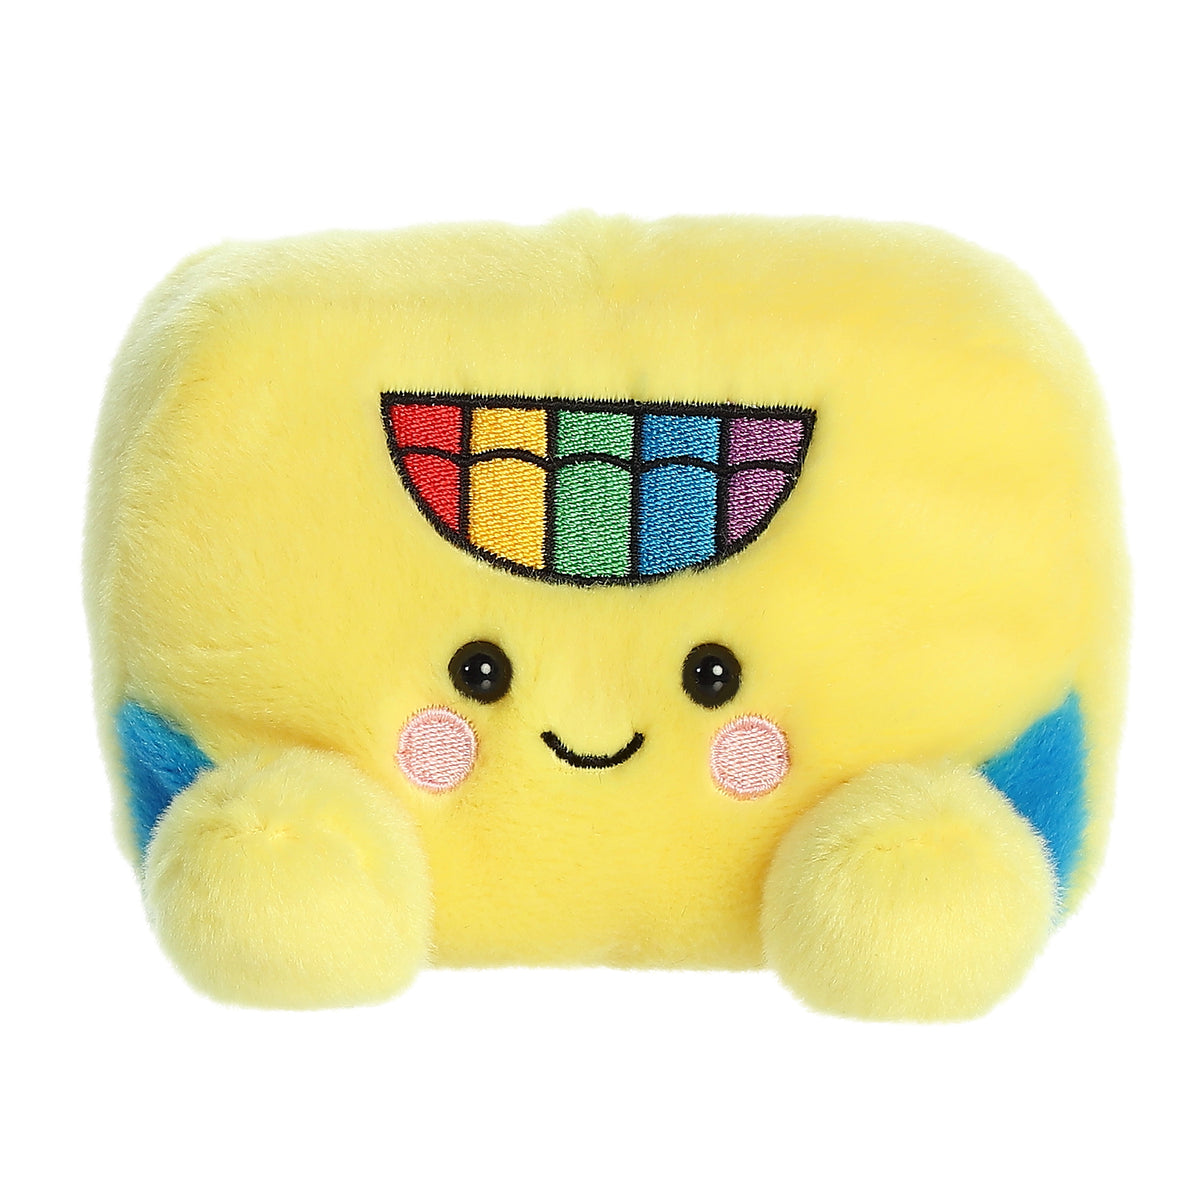 Doodle Crayon Box plush from Palm Pals, golden with a spectrum of colors of crayons, embodies creativity and joy